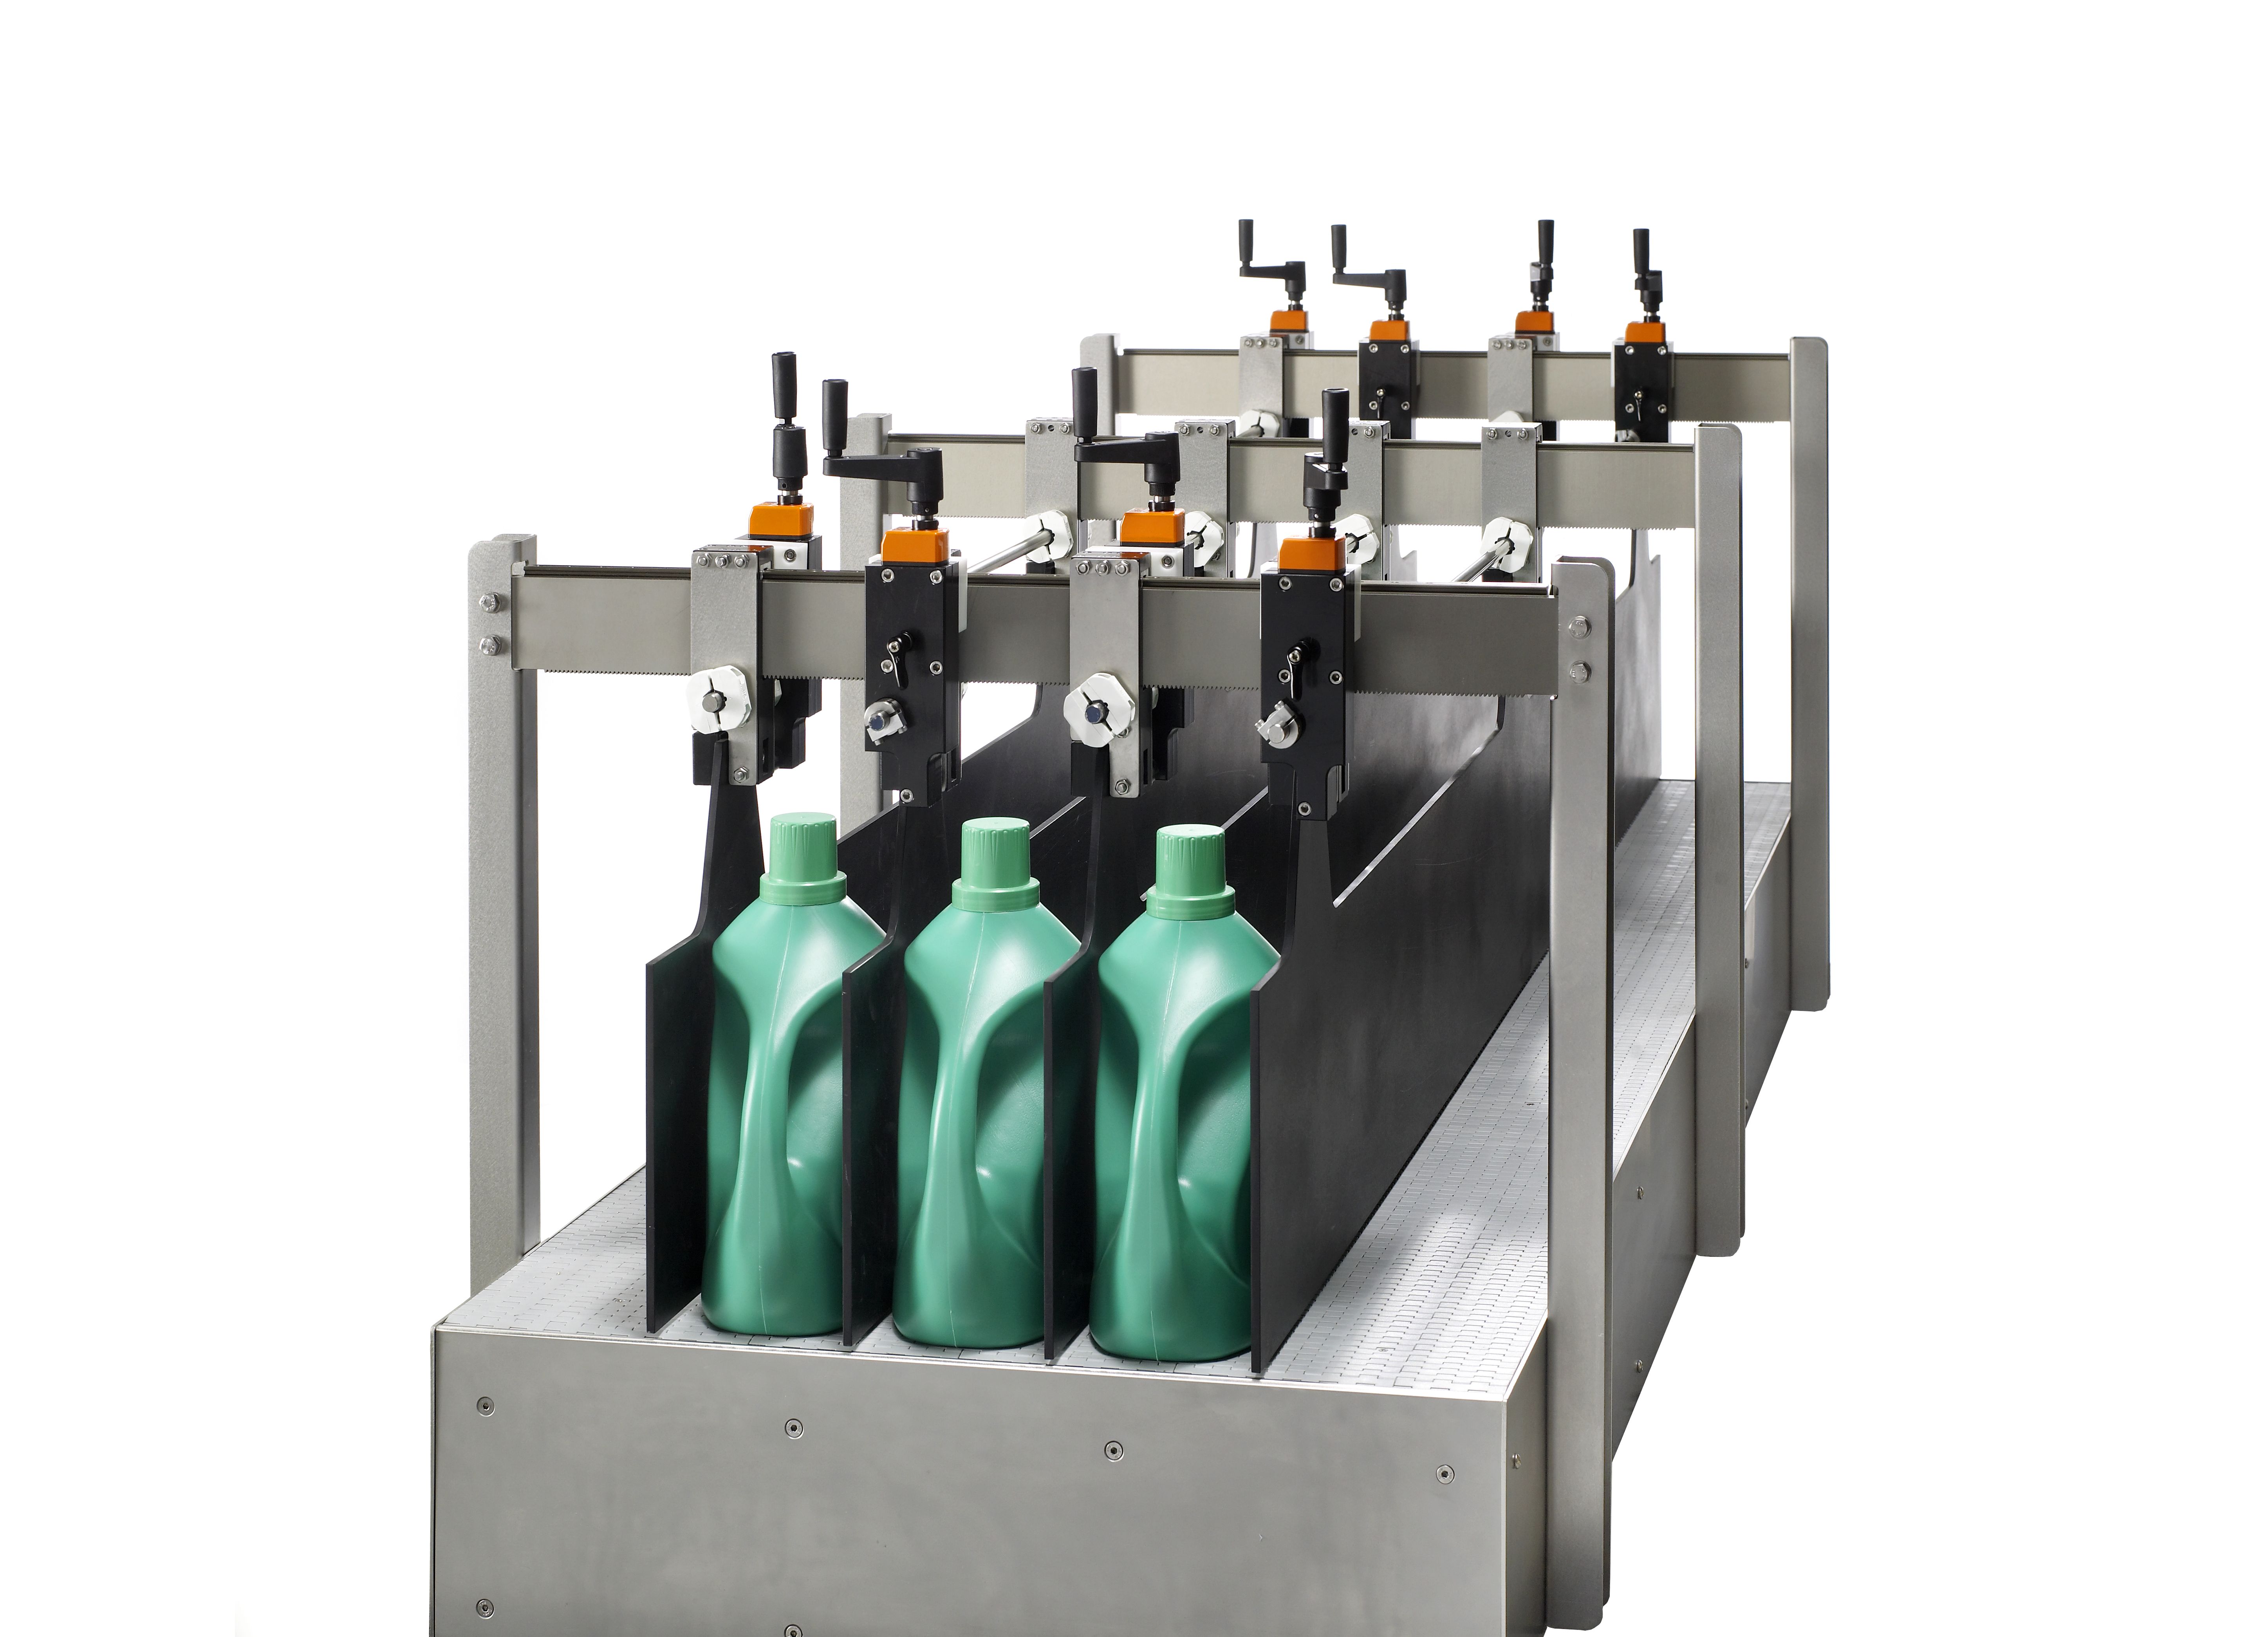 New Multi-Lane Adjustment System allows customers to rapidly and simply adjust multiple packaging lanes, including corners and funnels, without changing parts.